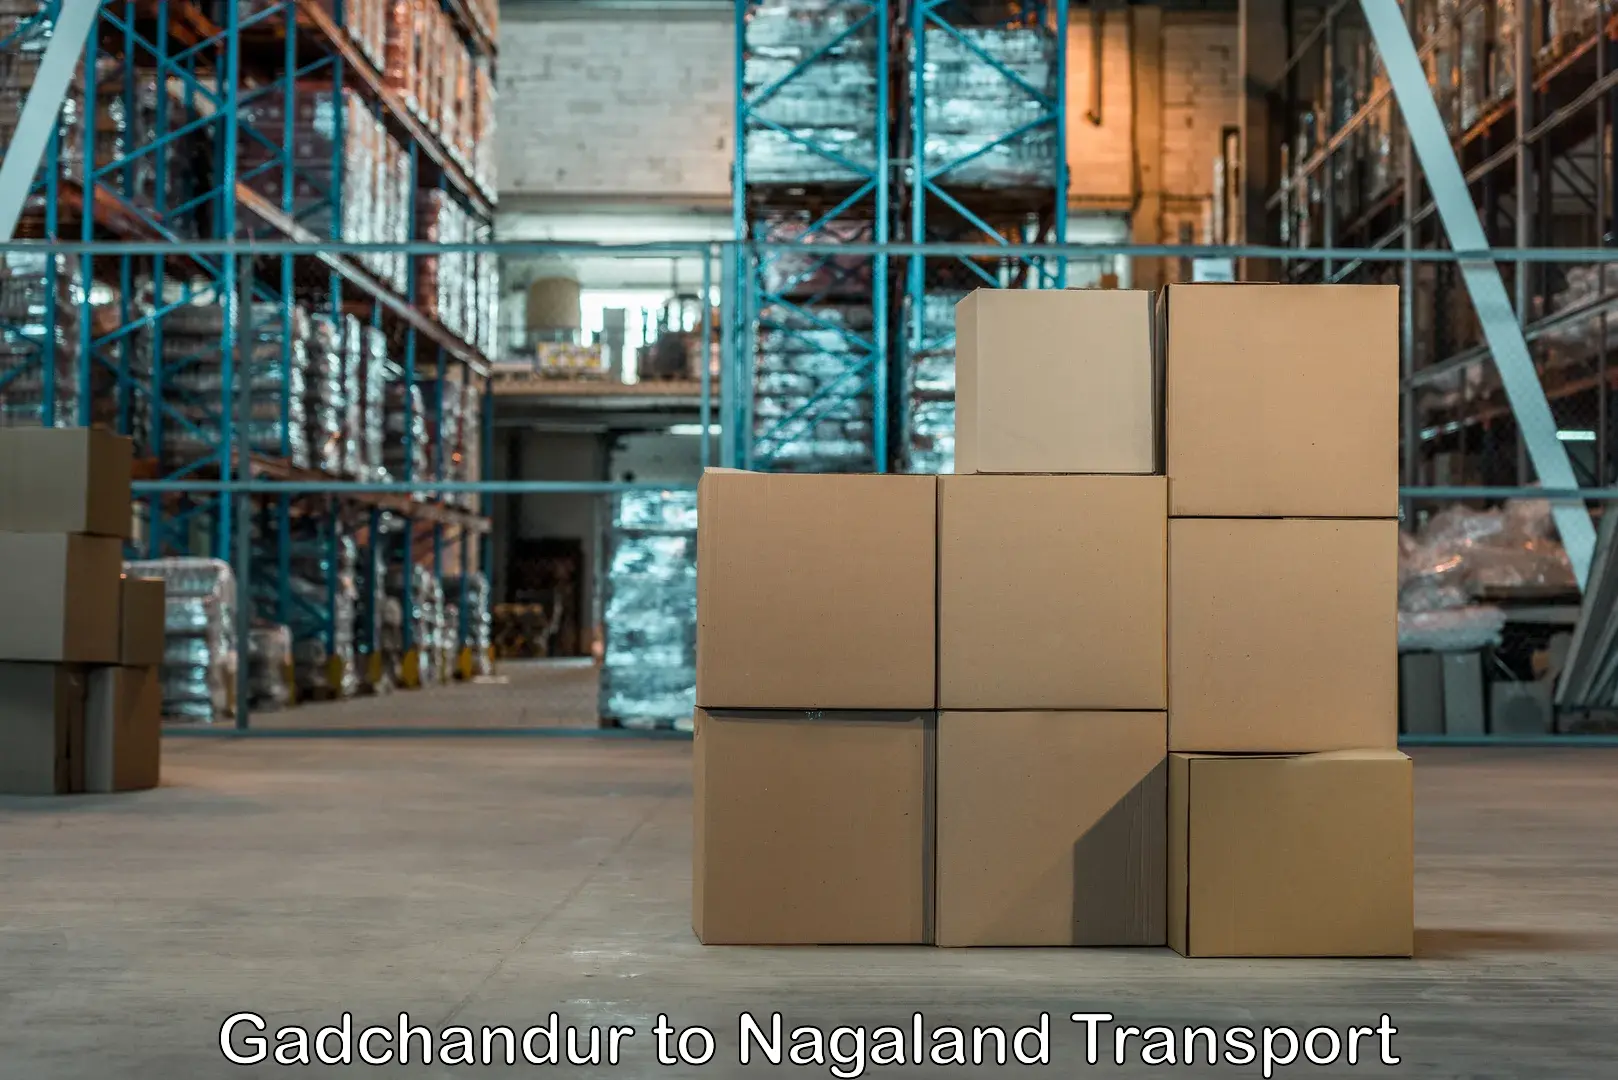 Transport in sharing in Gadchandur to Nagaland